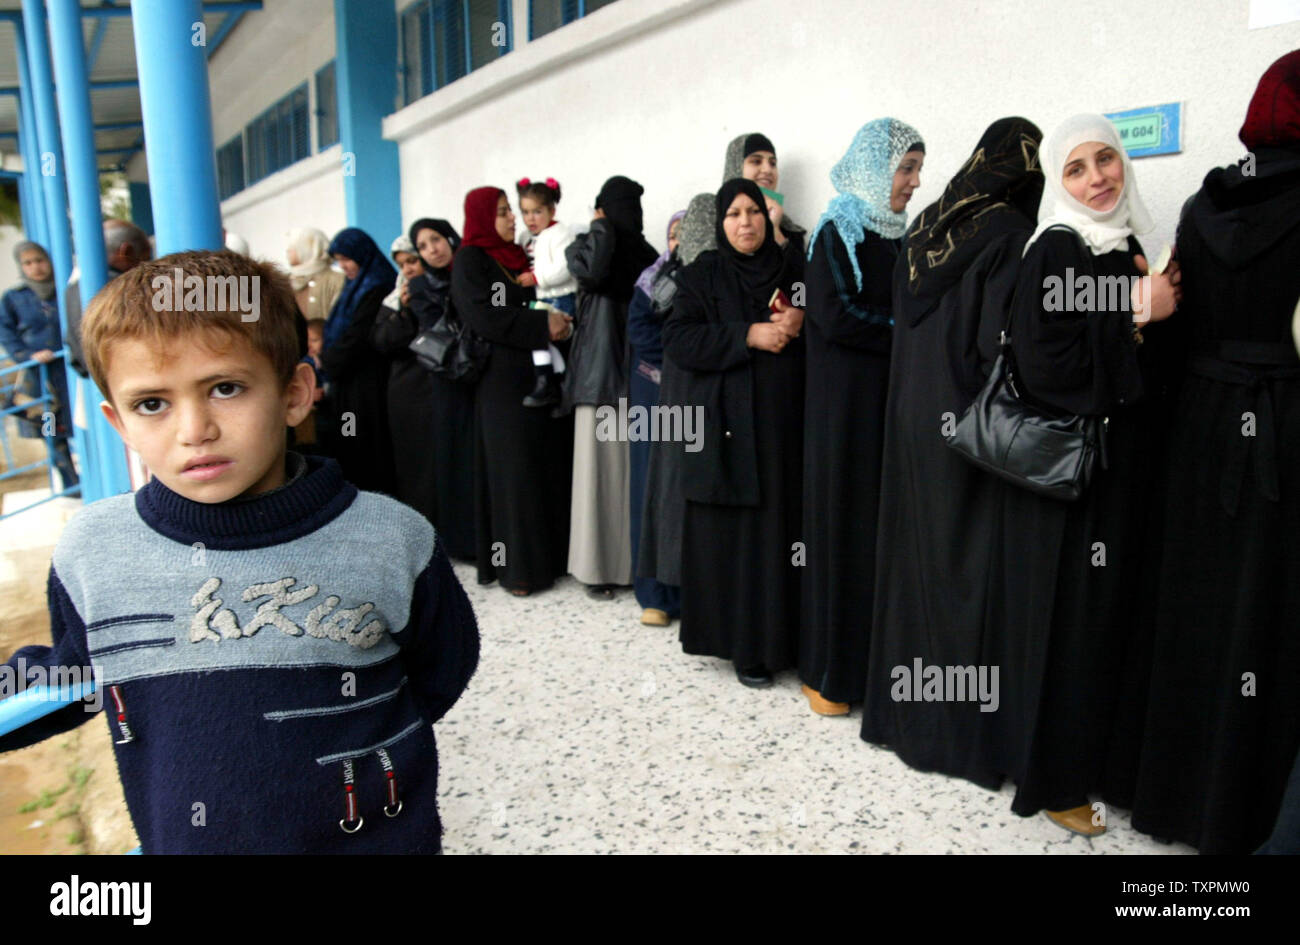 A Palestinian child stands beside women waiting in line to cast their ballots inside a polling station in Gaza City January 25, 2006. Polls opened in the West Bank and Gaza Strip in the only second ever election to the Gaza-based parliament since the formation of the Palestinian Authority. The poll will see the ruling Fatah faction face the first major test to its hold on power from the radical Islamist movement Hamas.    (UPI Photo/Ismael Mohamad) Stock Photo